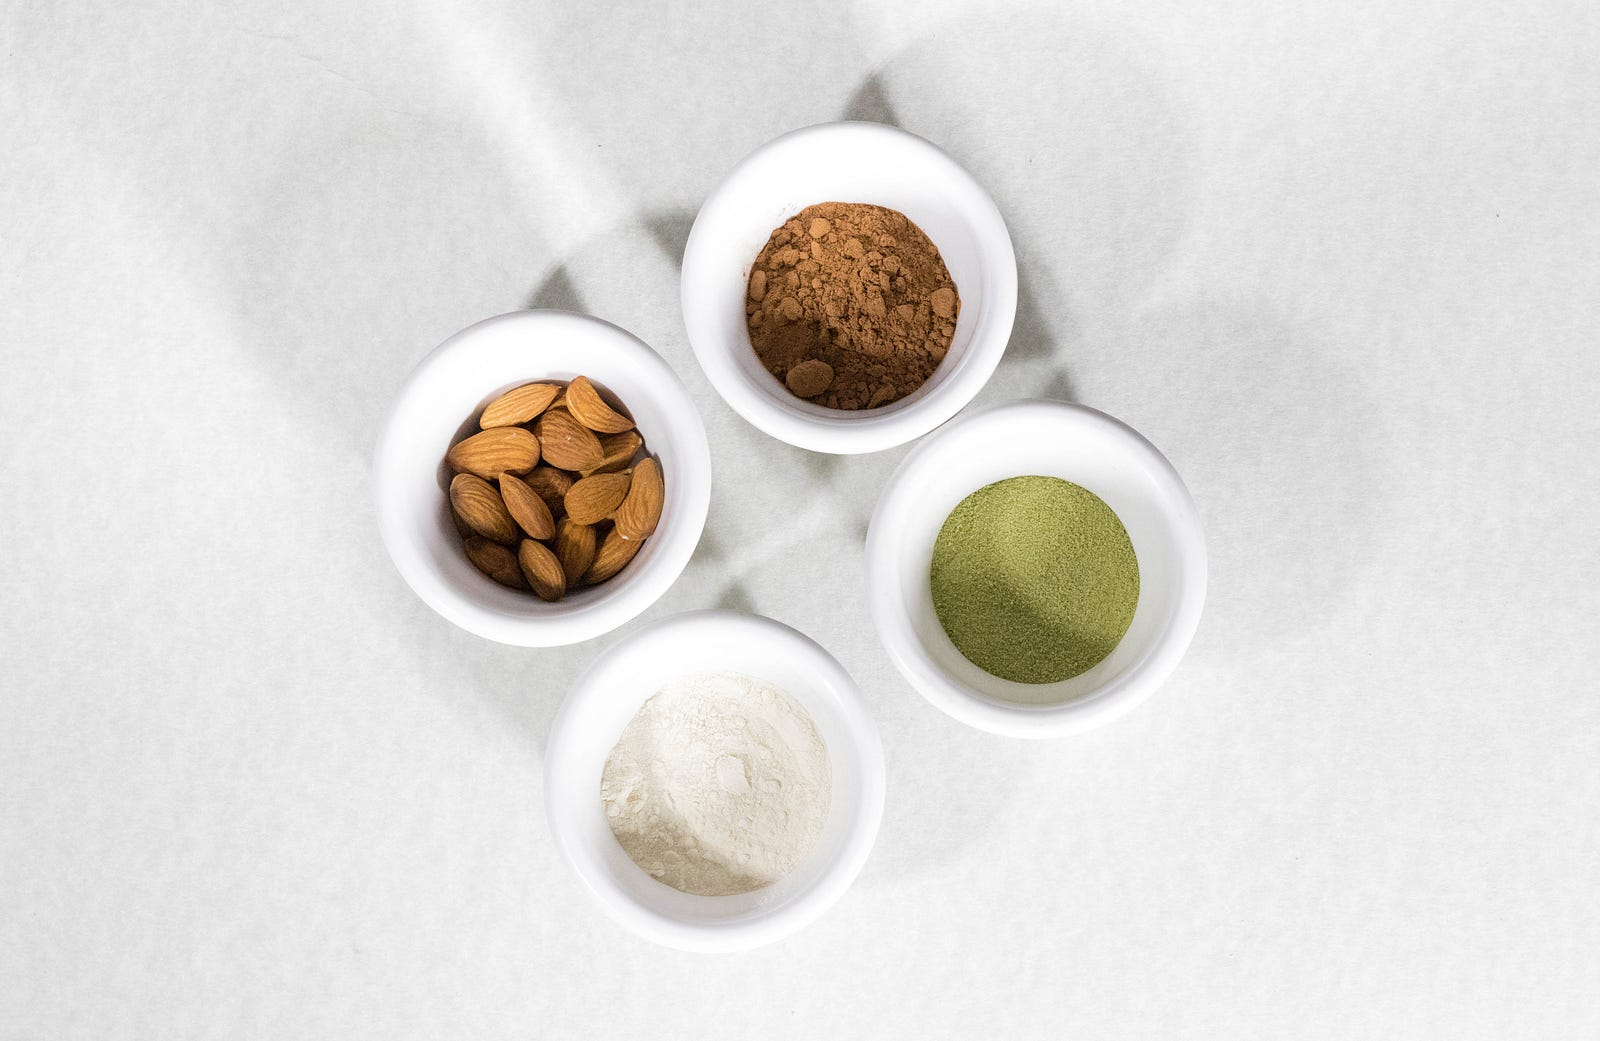 Four small white bowls, one containing almonds. The other three have poders, colored white, green, and brown. Almonds are the tree nut with the most vitamin E, with 7.7 milligrams (mg) in every 30-gram serving. In addition, a serving of almonds has 80 mg of calcium and 0.3 mg of riboflavin.